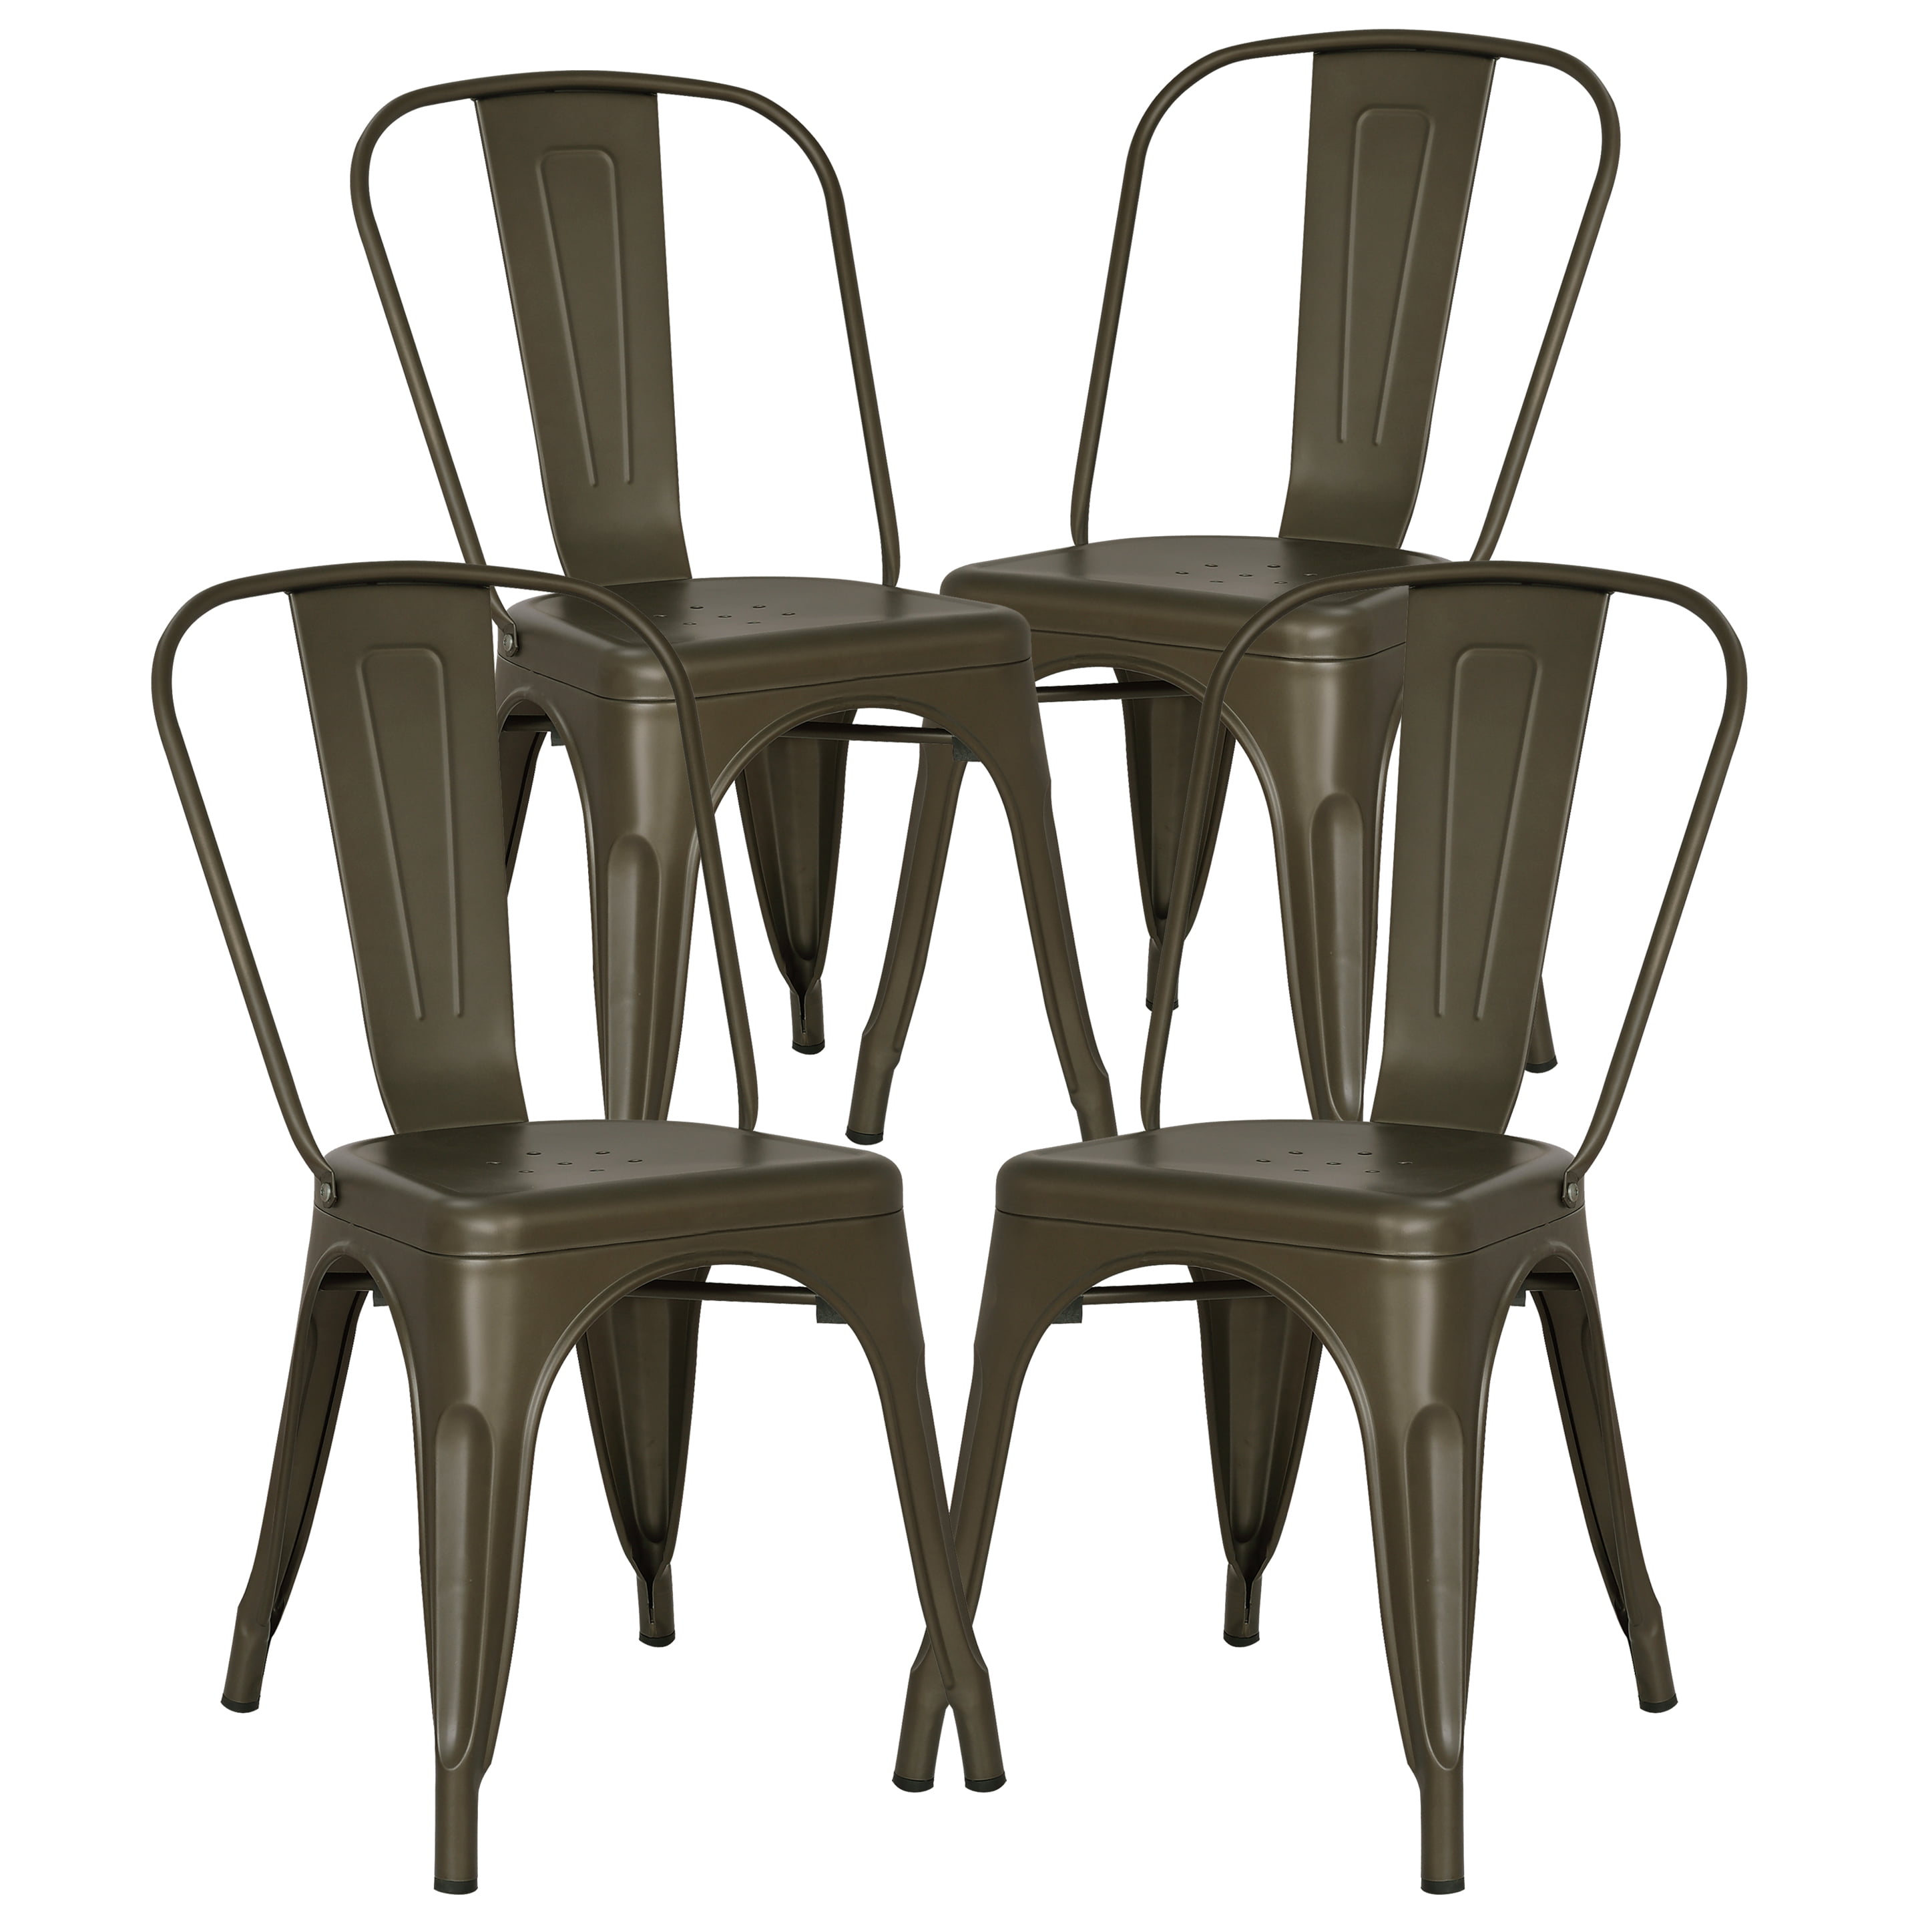 Gun Metal Bistros and Cafes Retro Style Your Price Furniture.com Set of 6 Metal Industrial Dining Chairs Stackable Tolix Style Kitchen Vintage Seat For Home